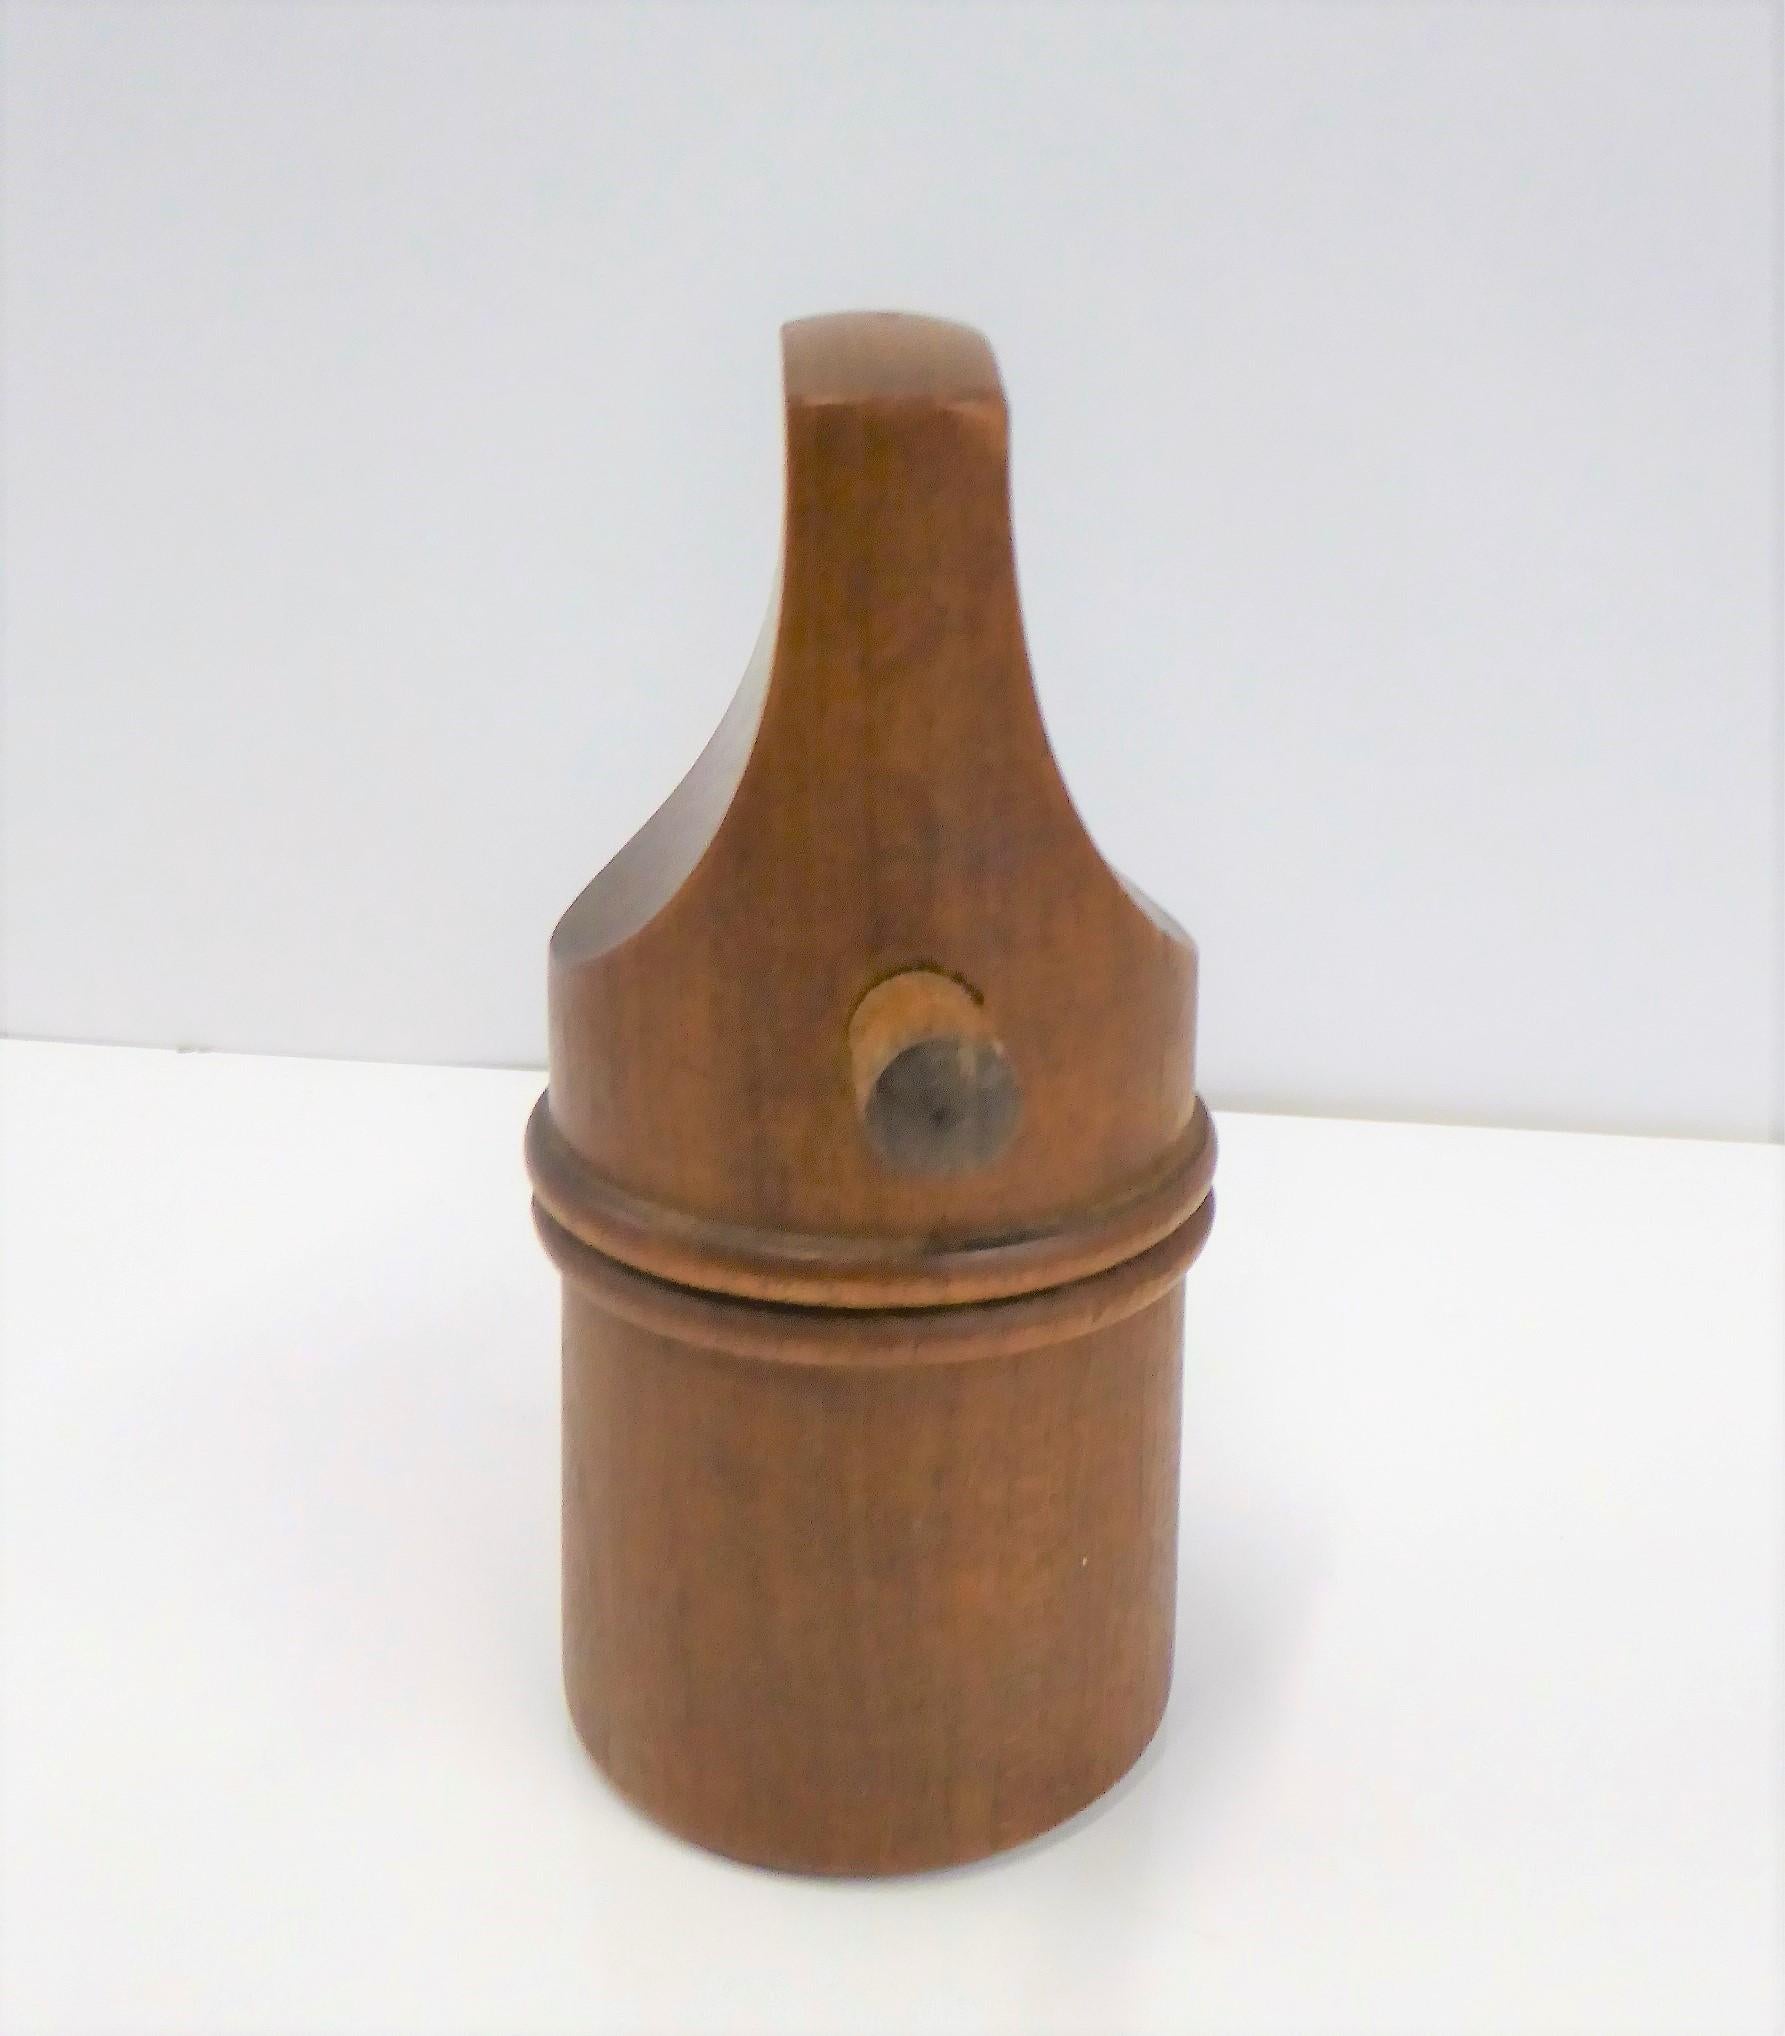 Great Mid-Century Modern teak peppermill / salt shaker combo by Jens Harald Quistgaard for Dansk Designs. Ground pepper comes out of the bottom when top turns and salt sprinkles from top when placed upside down. Refill for salt is by removing either